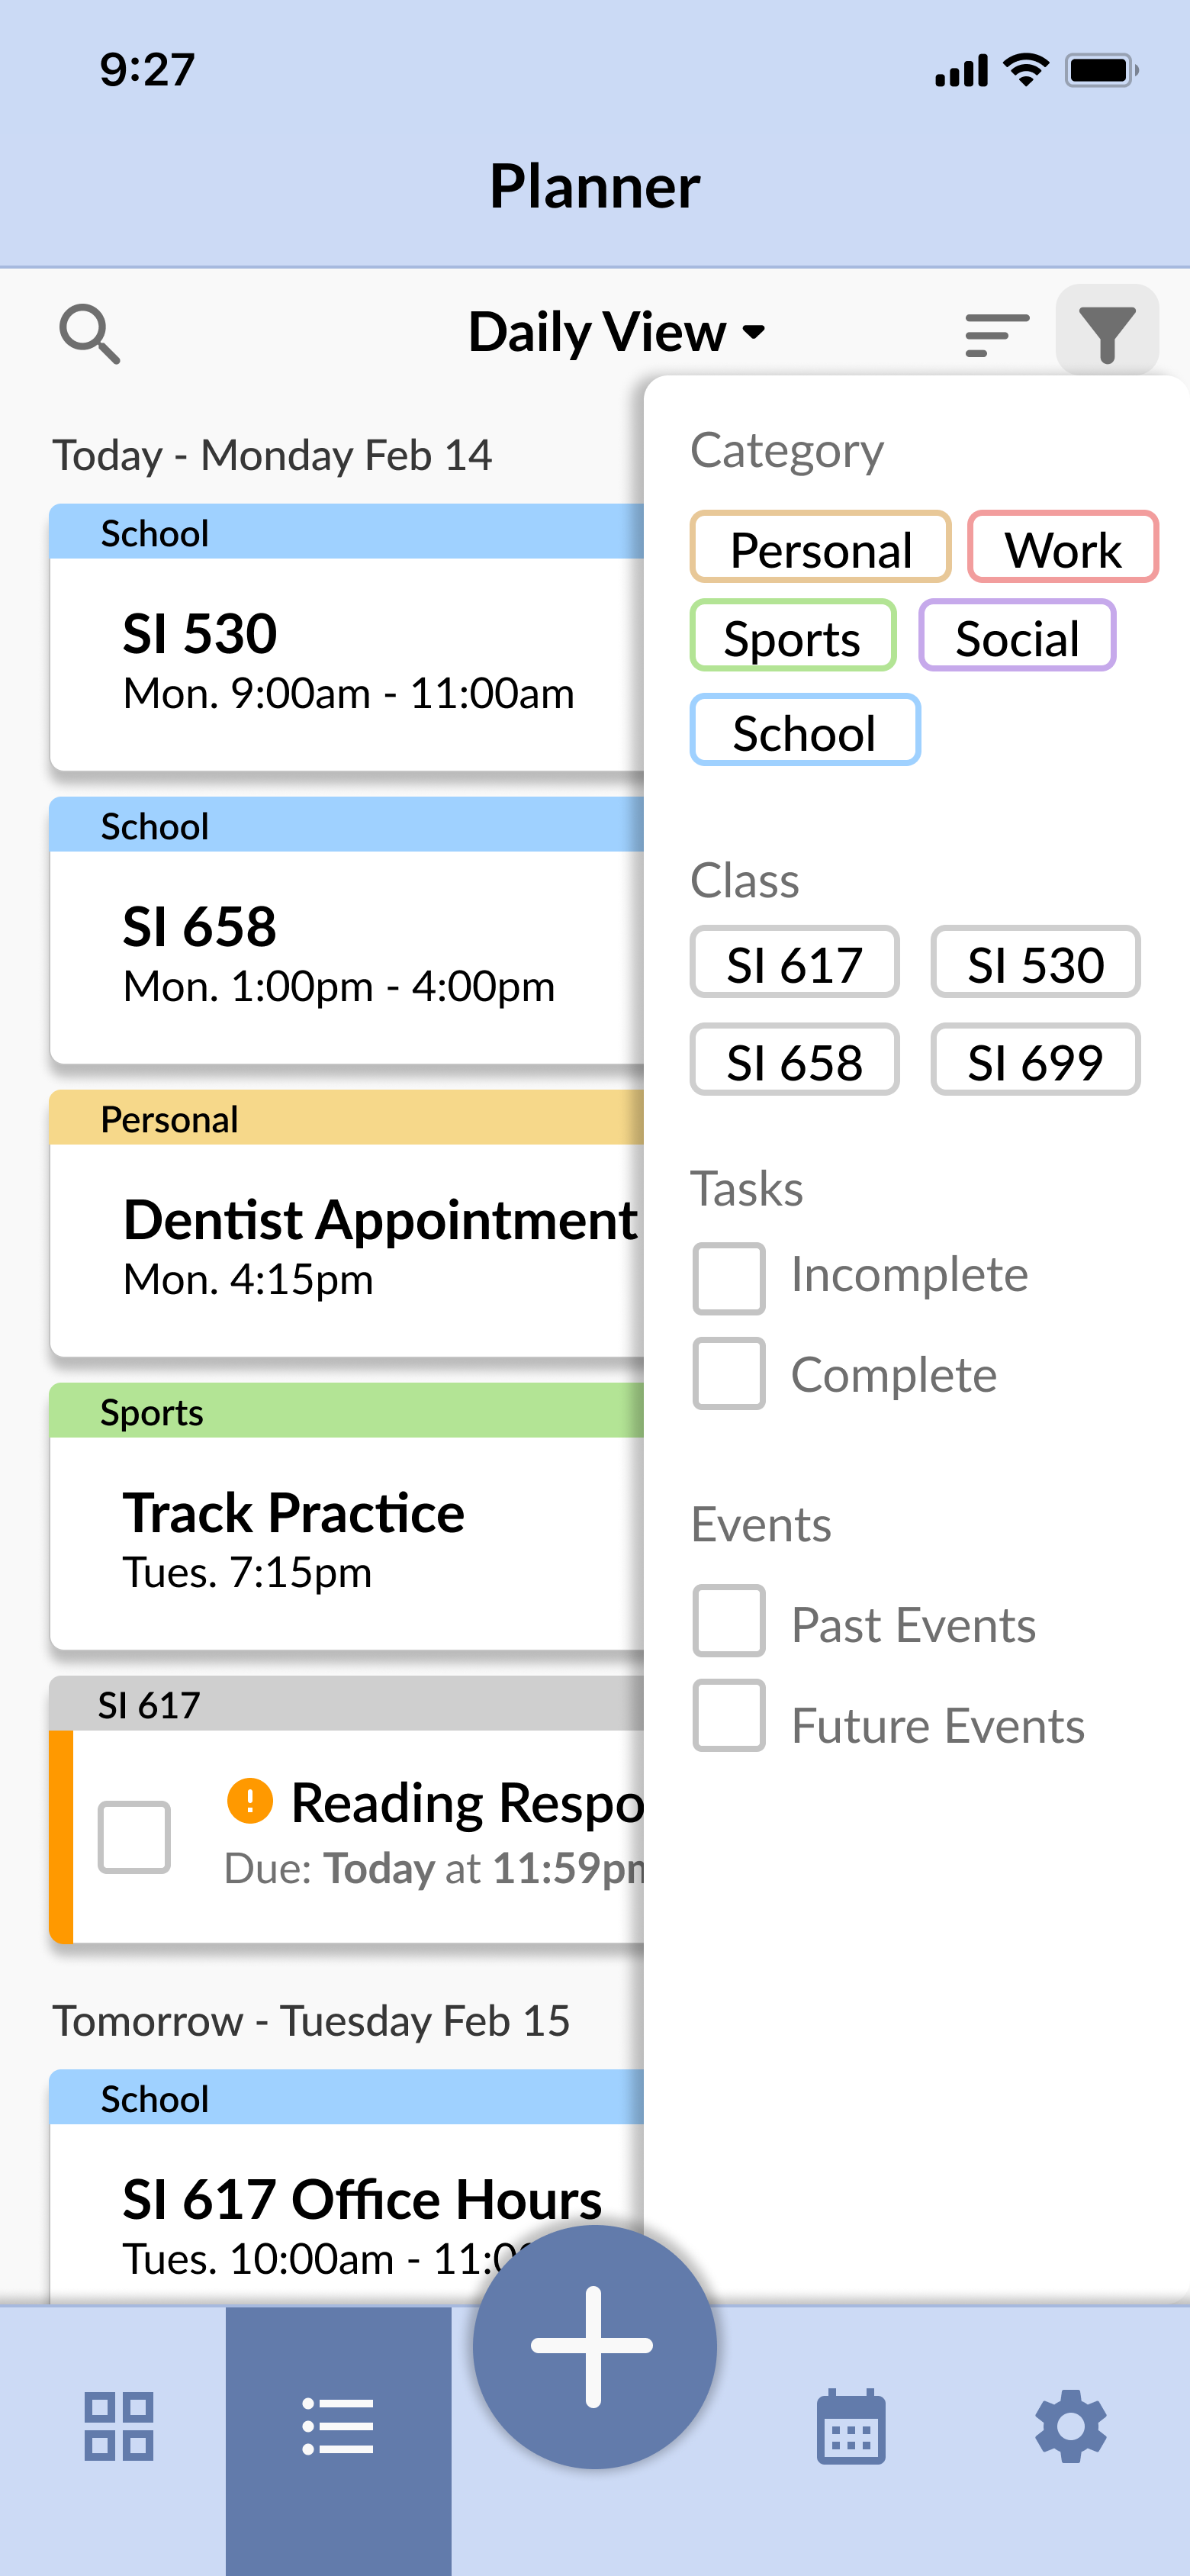 Dayly planner view high-fidelity prototype